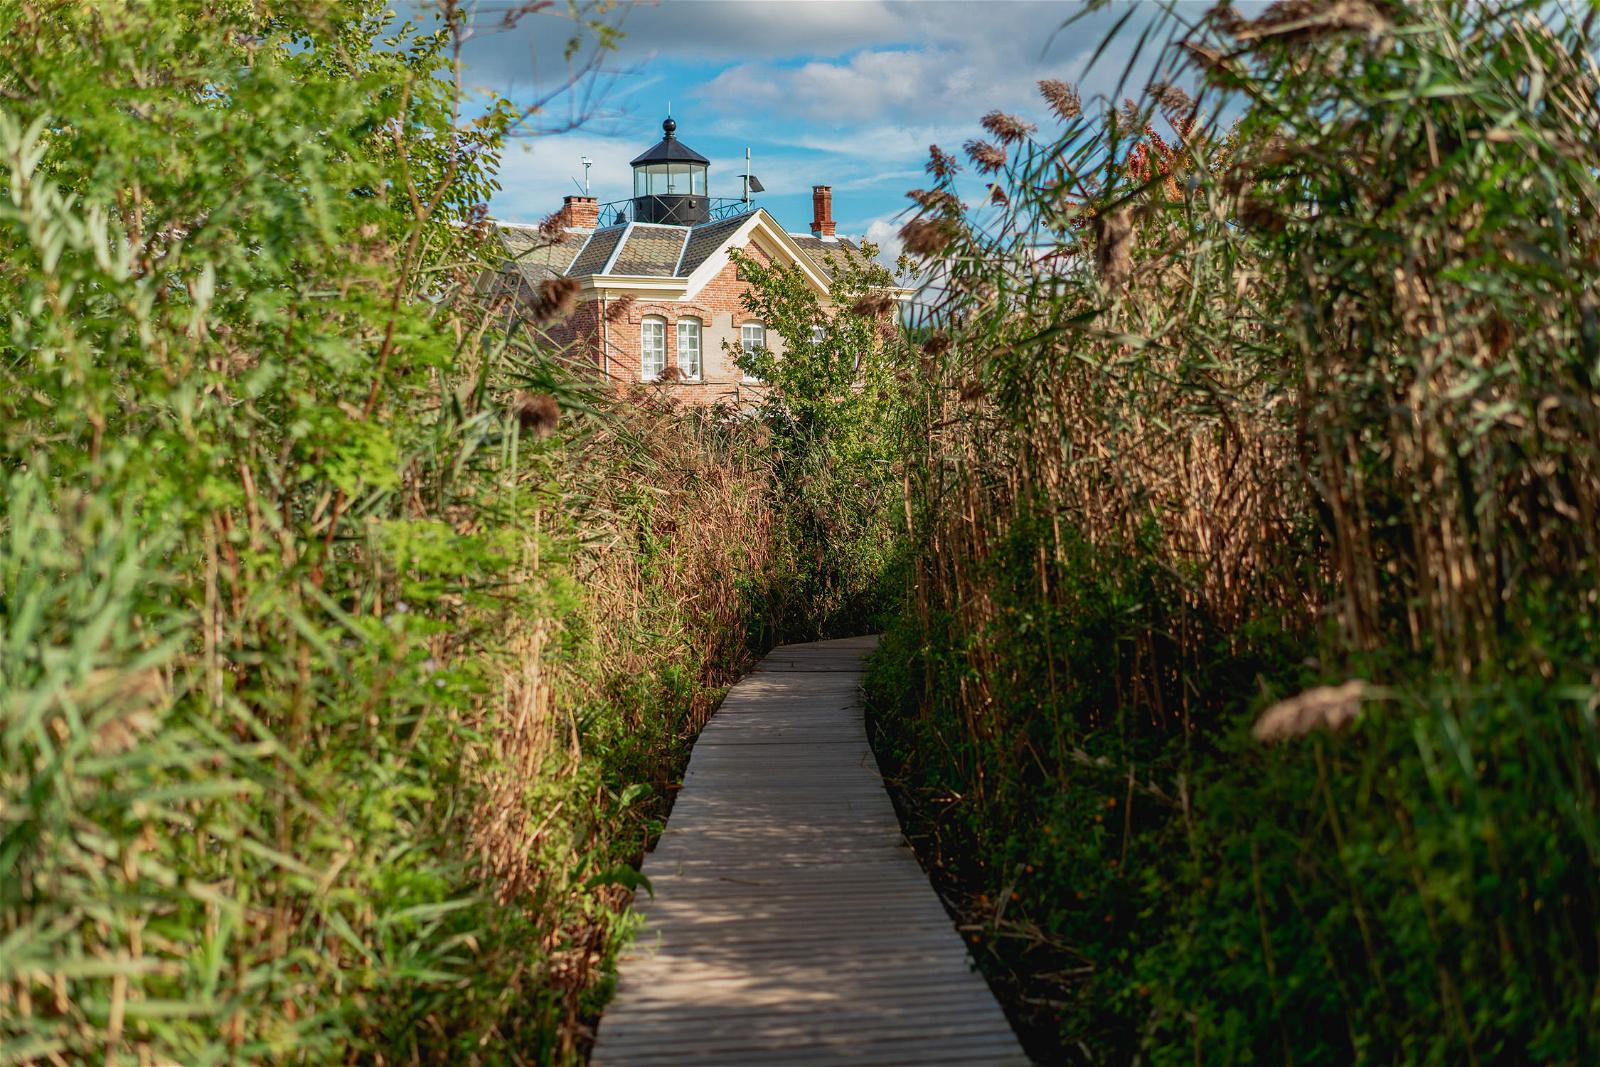 Photos of the Saugerties Lighthouse Trail in Upstate NY